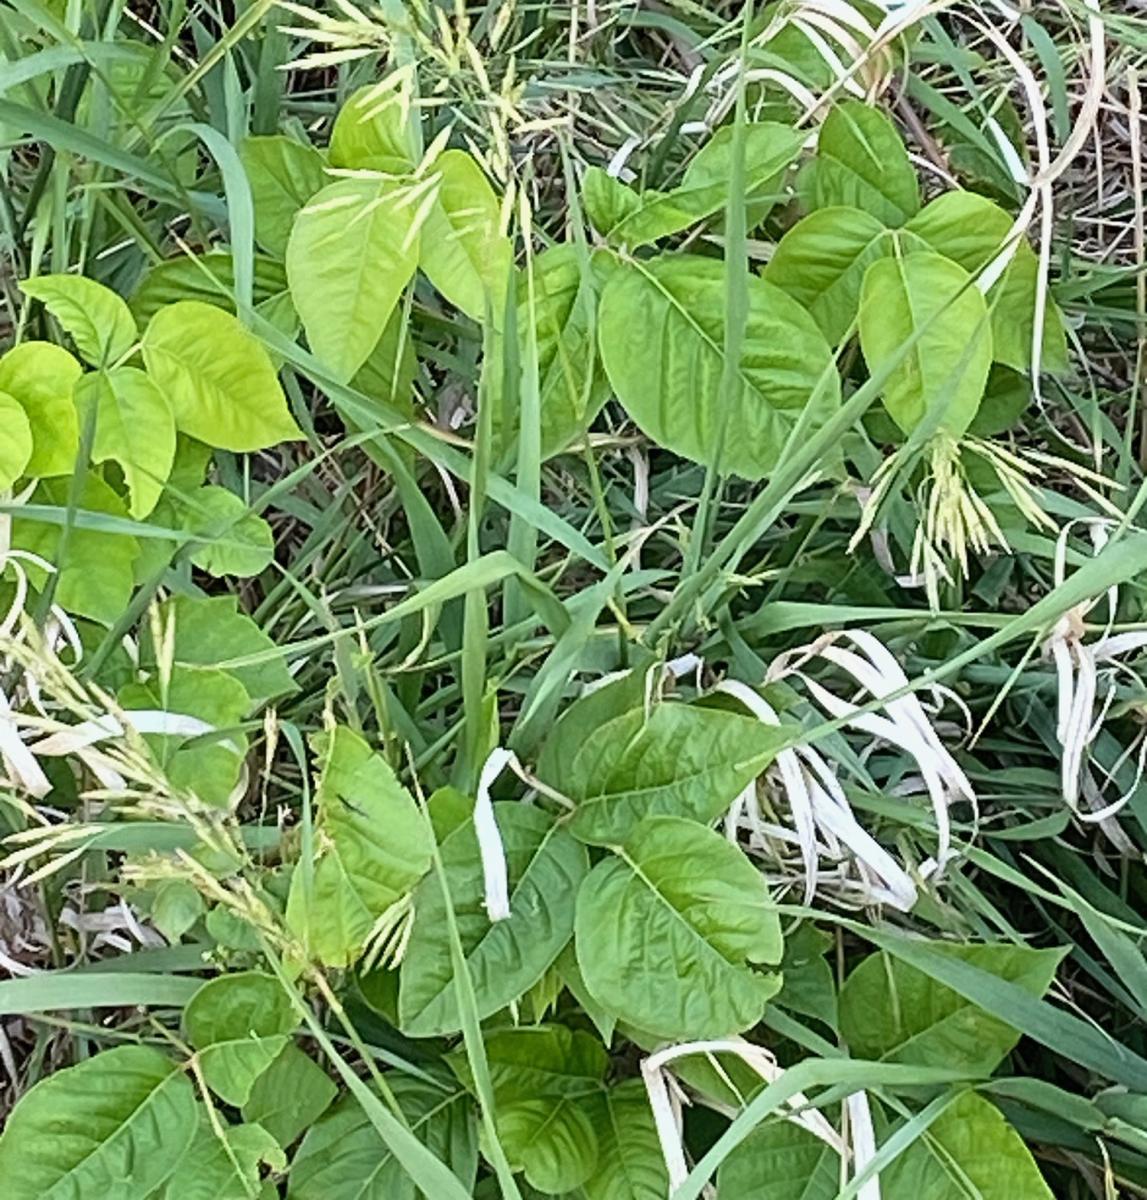 Image of poison ivy shoots growing in grass. 